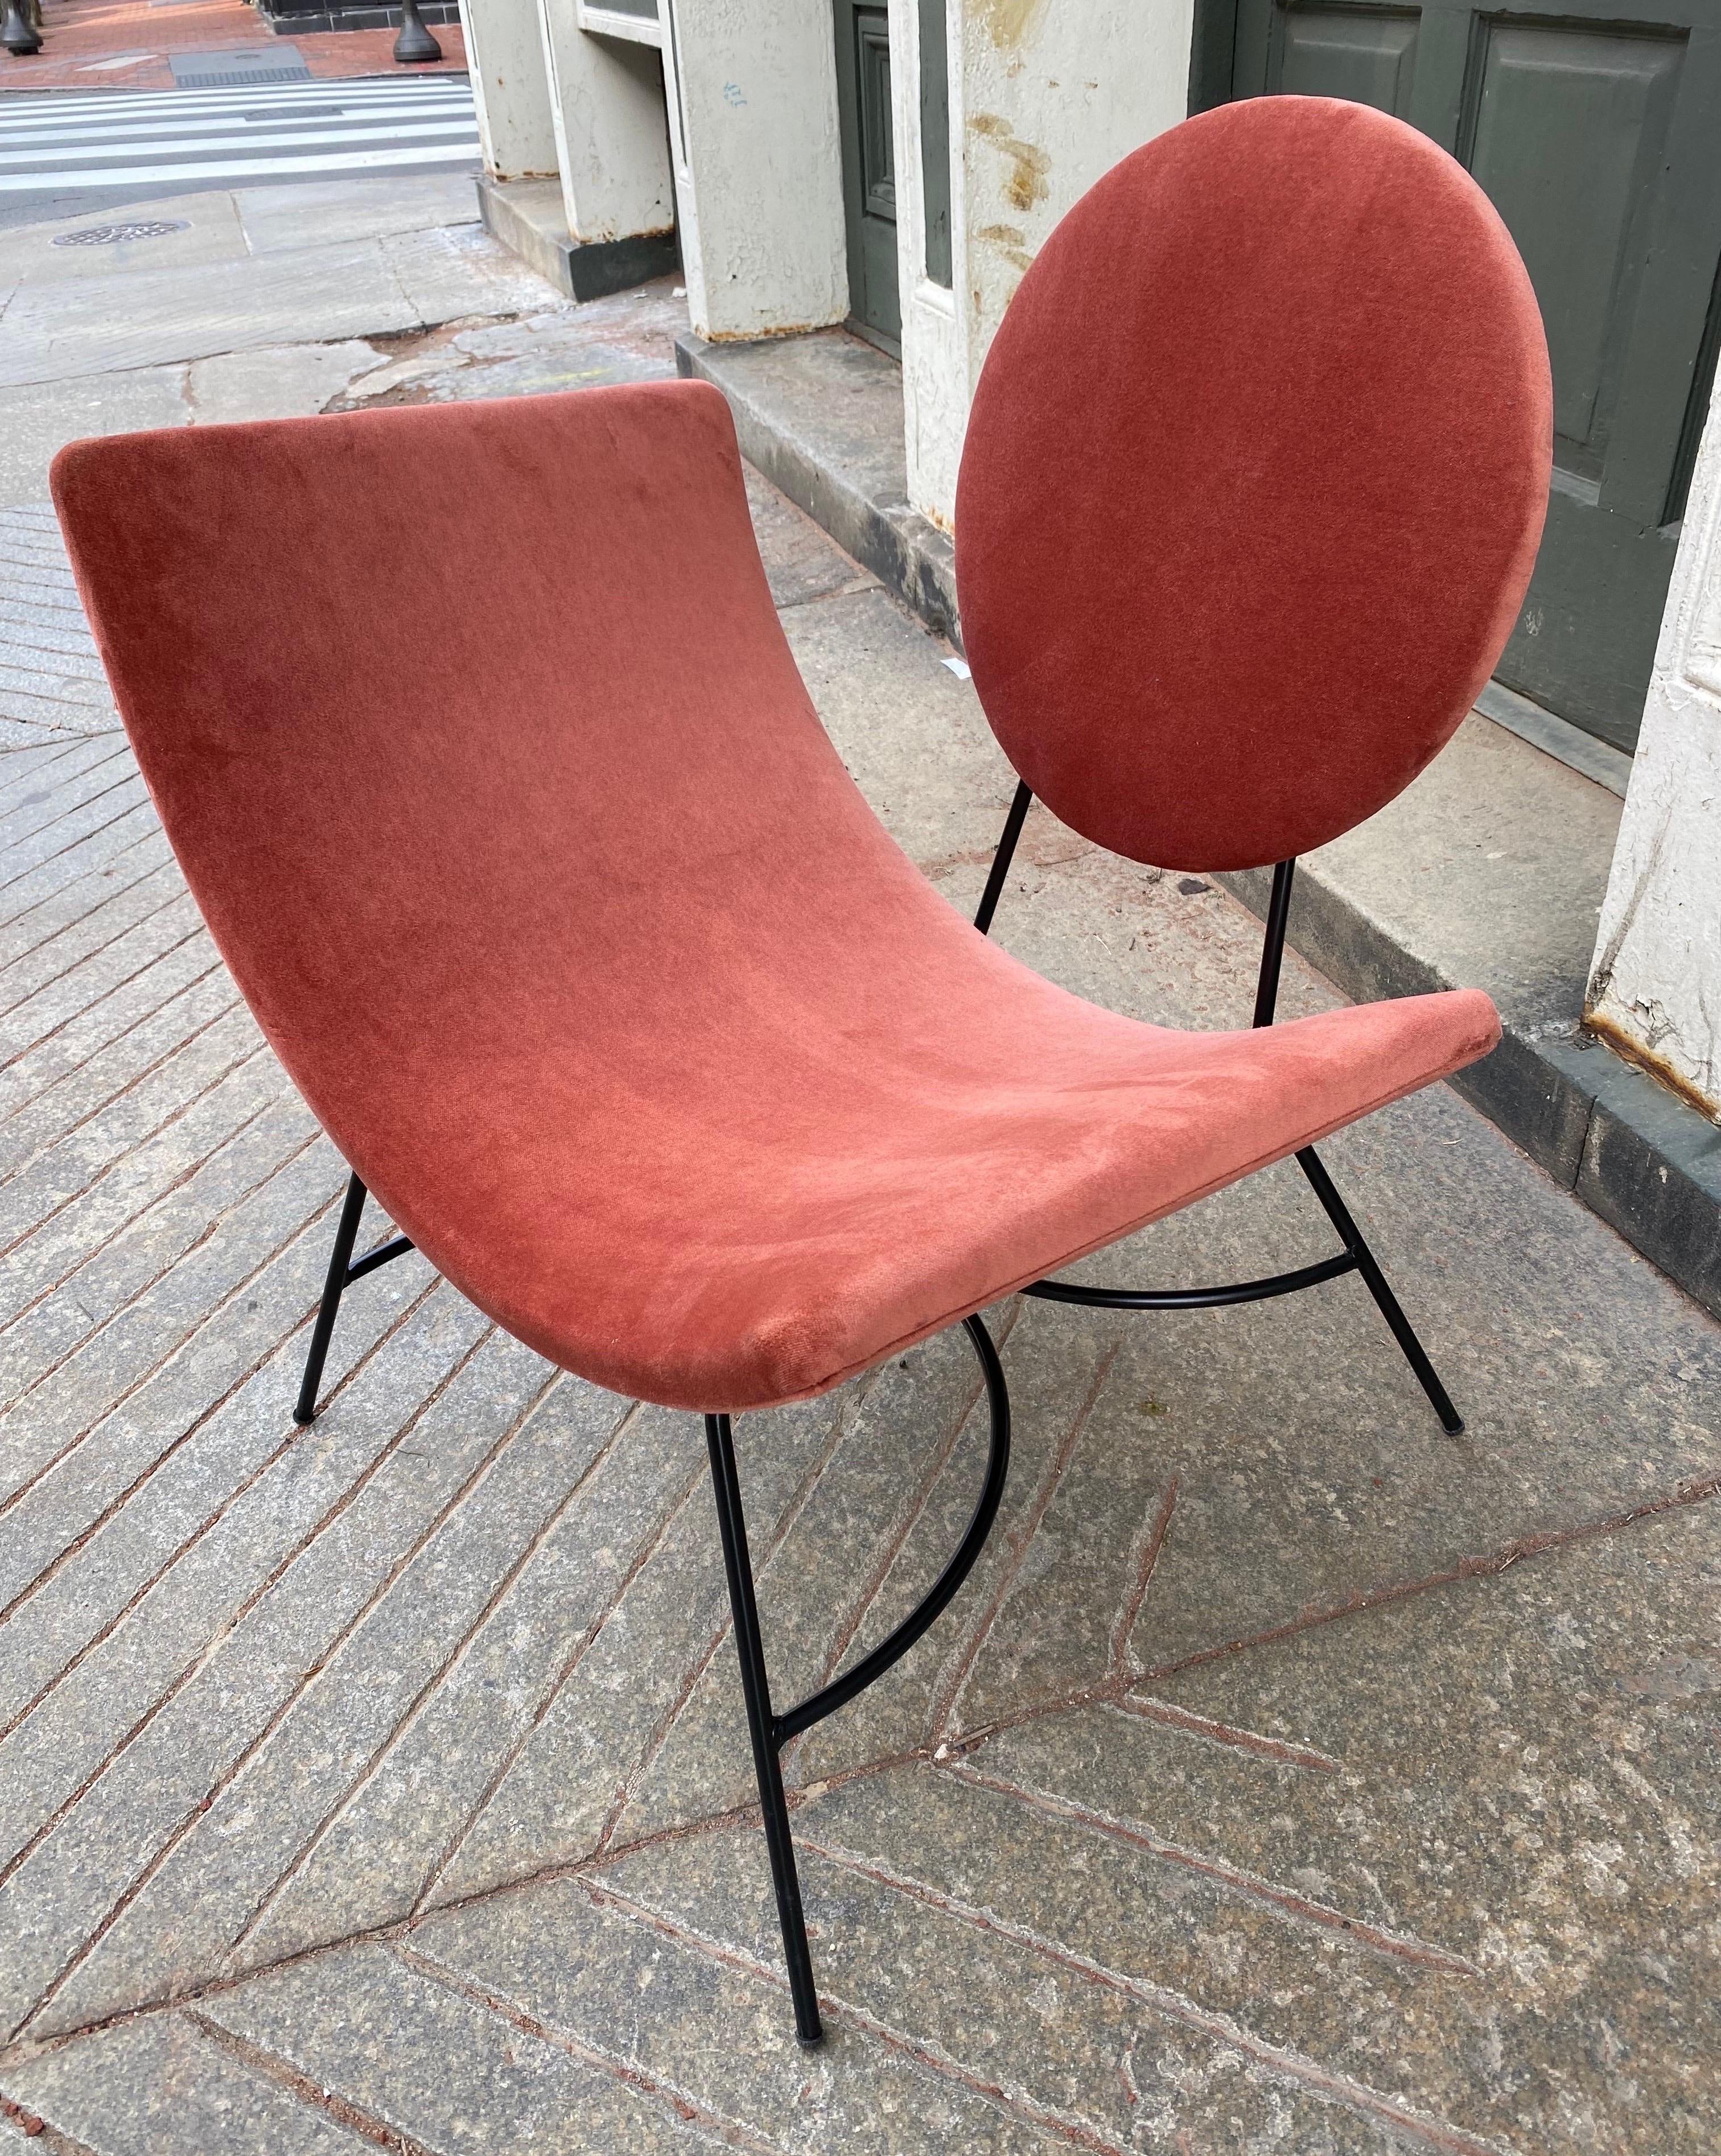 Elroy Left Arm Velvet and Iron Lounge Chair 
by Mitchell Gold + Bob Williams

